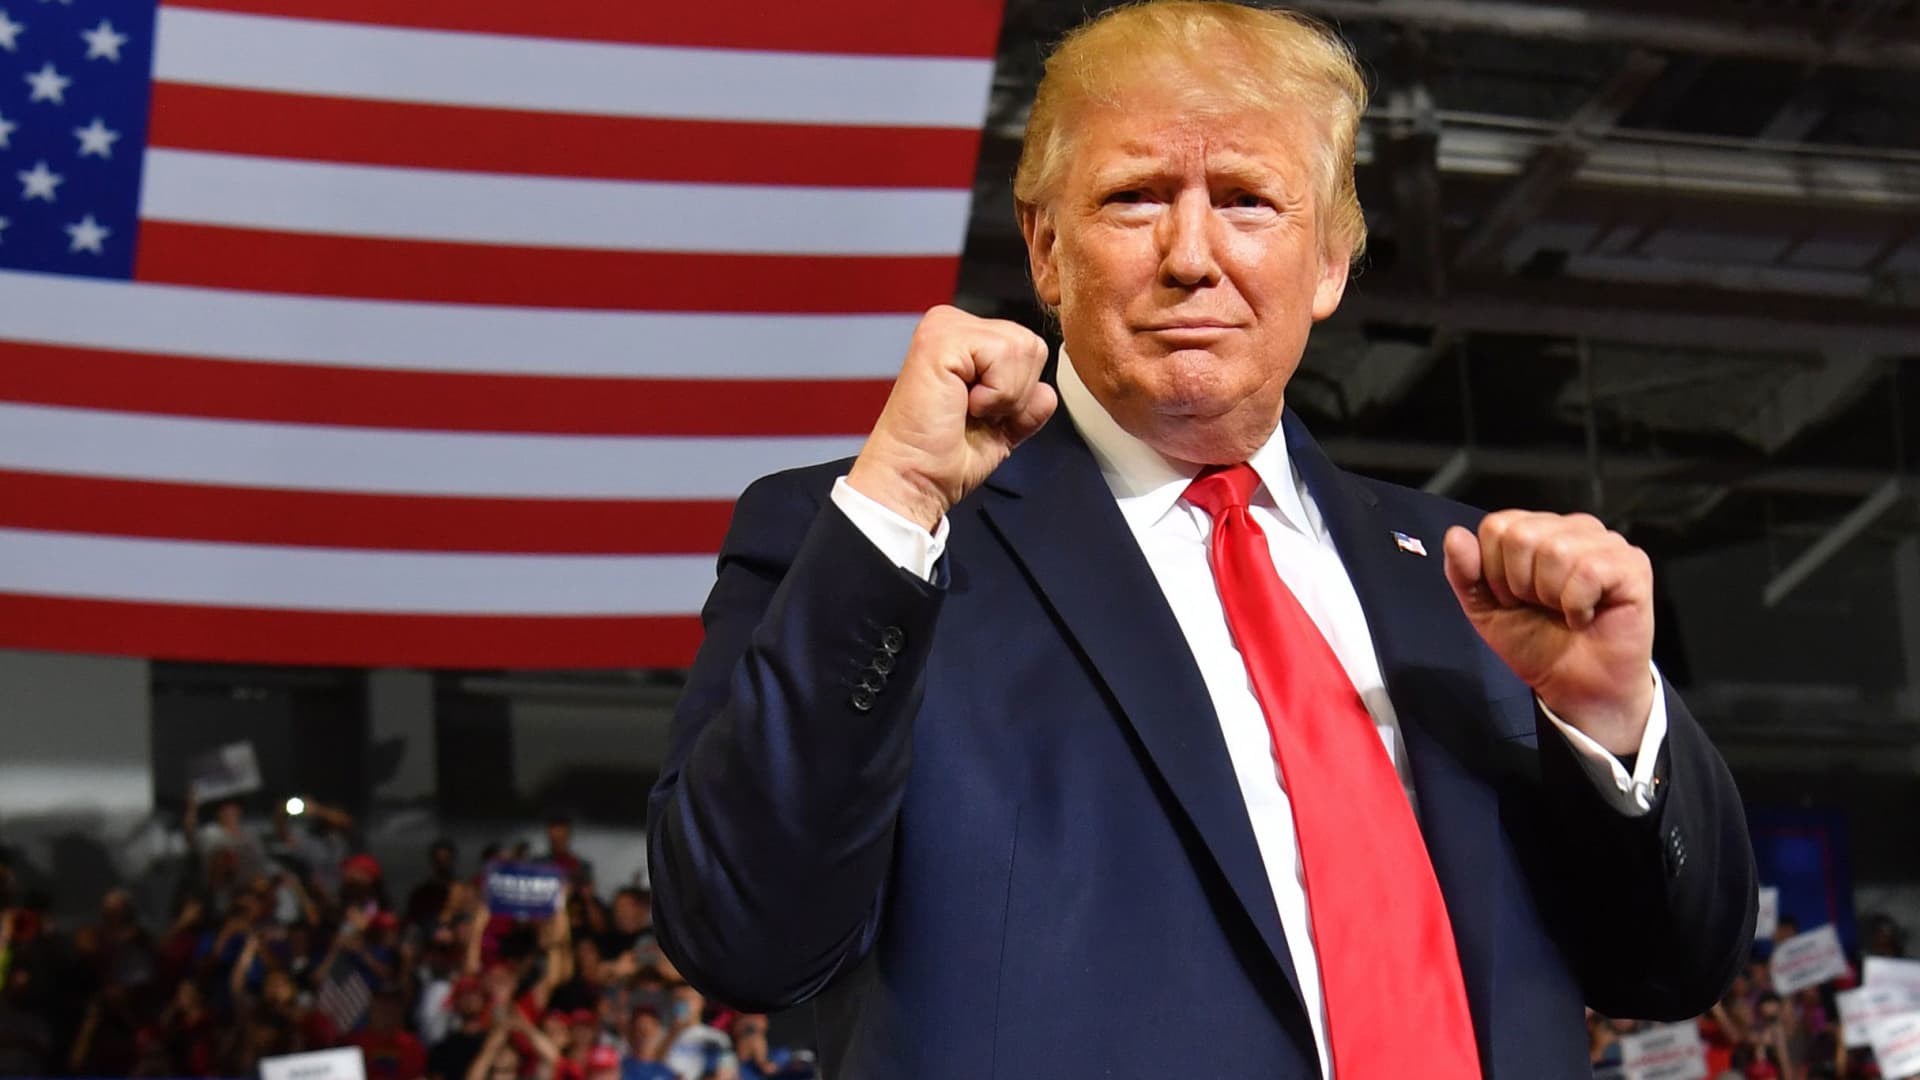 Trump is on his way to an easy win in 2020, according to Moody's accurate election model